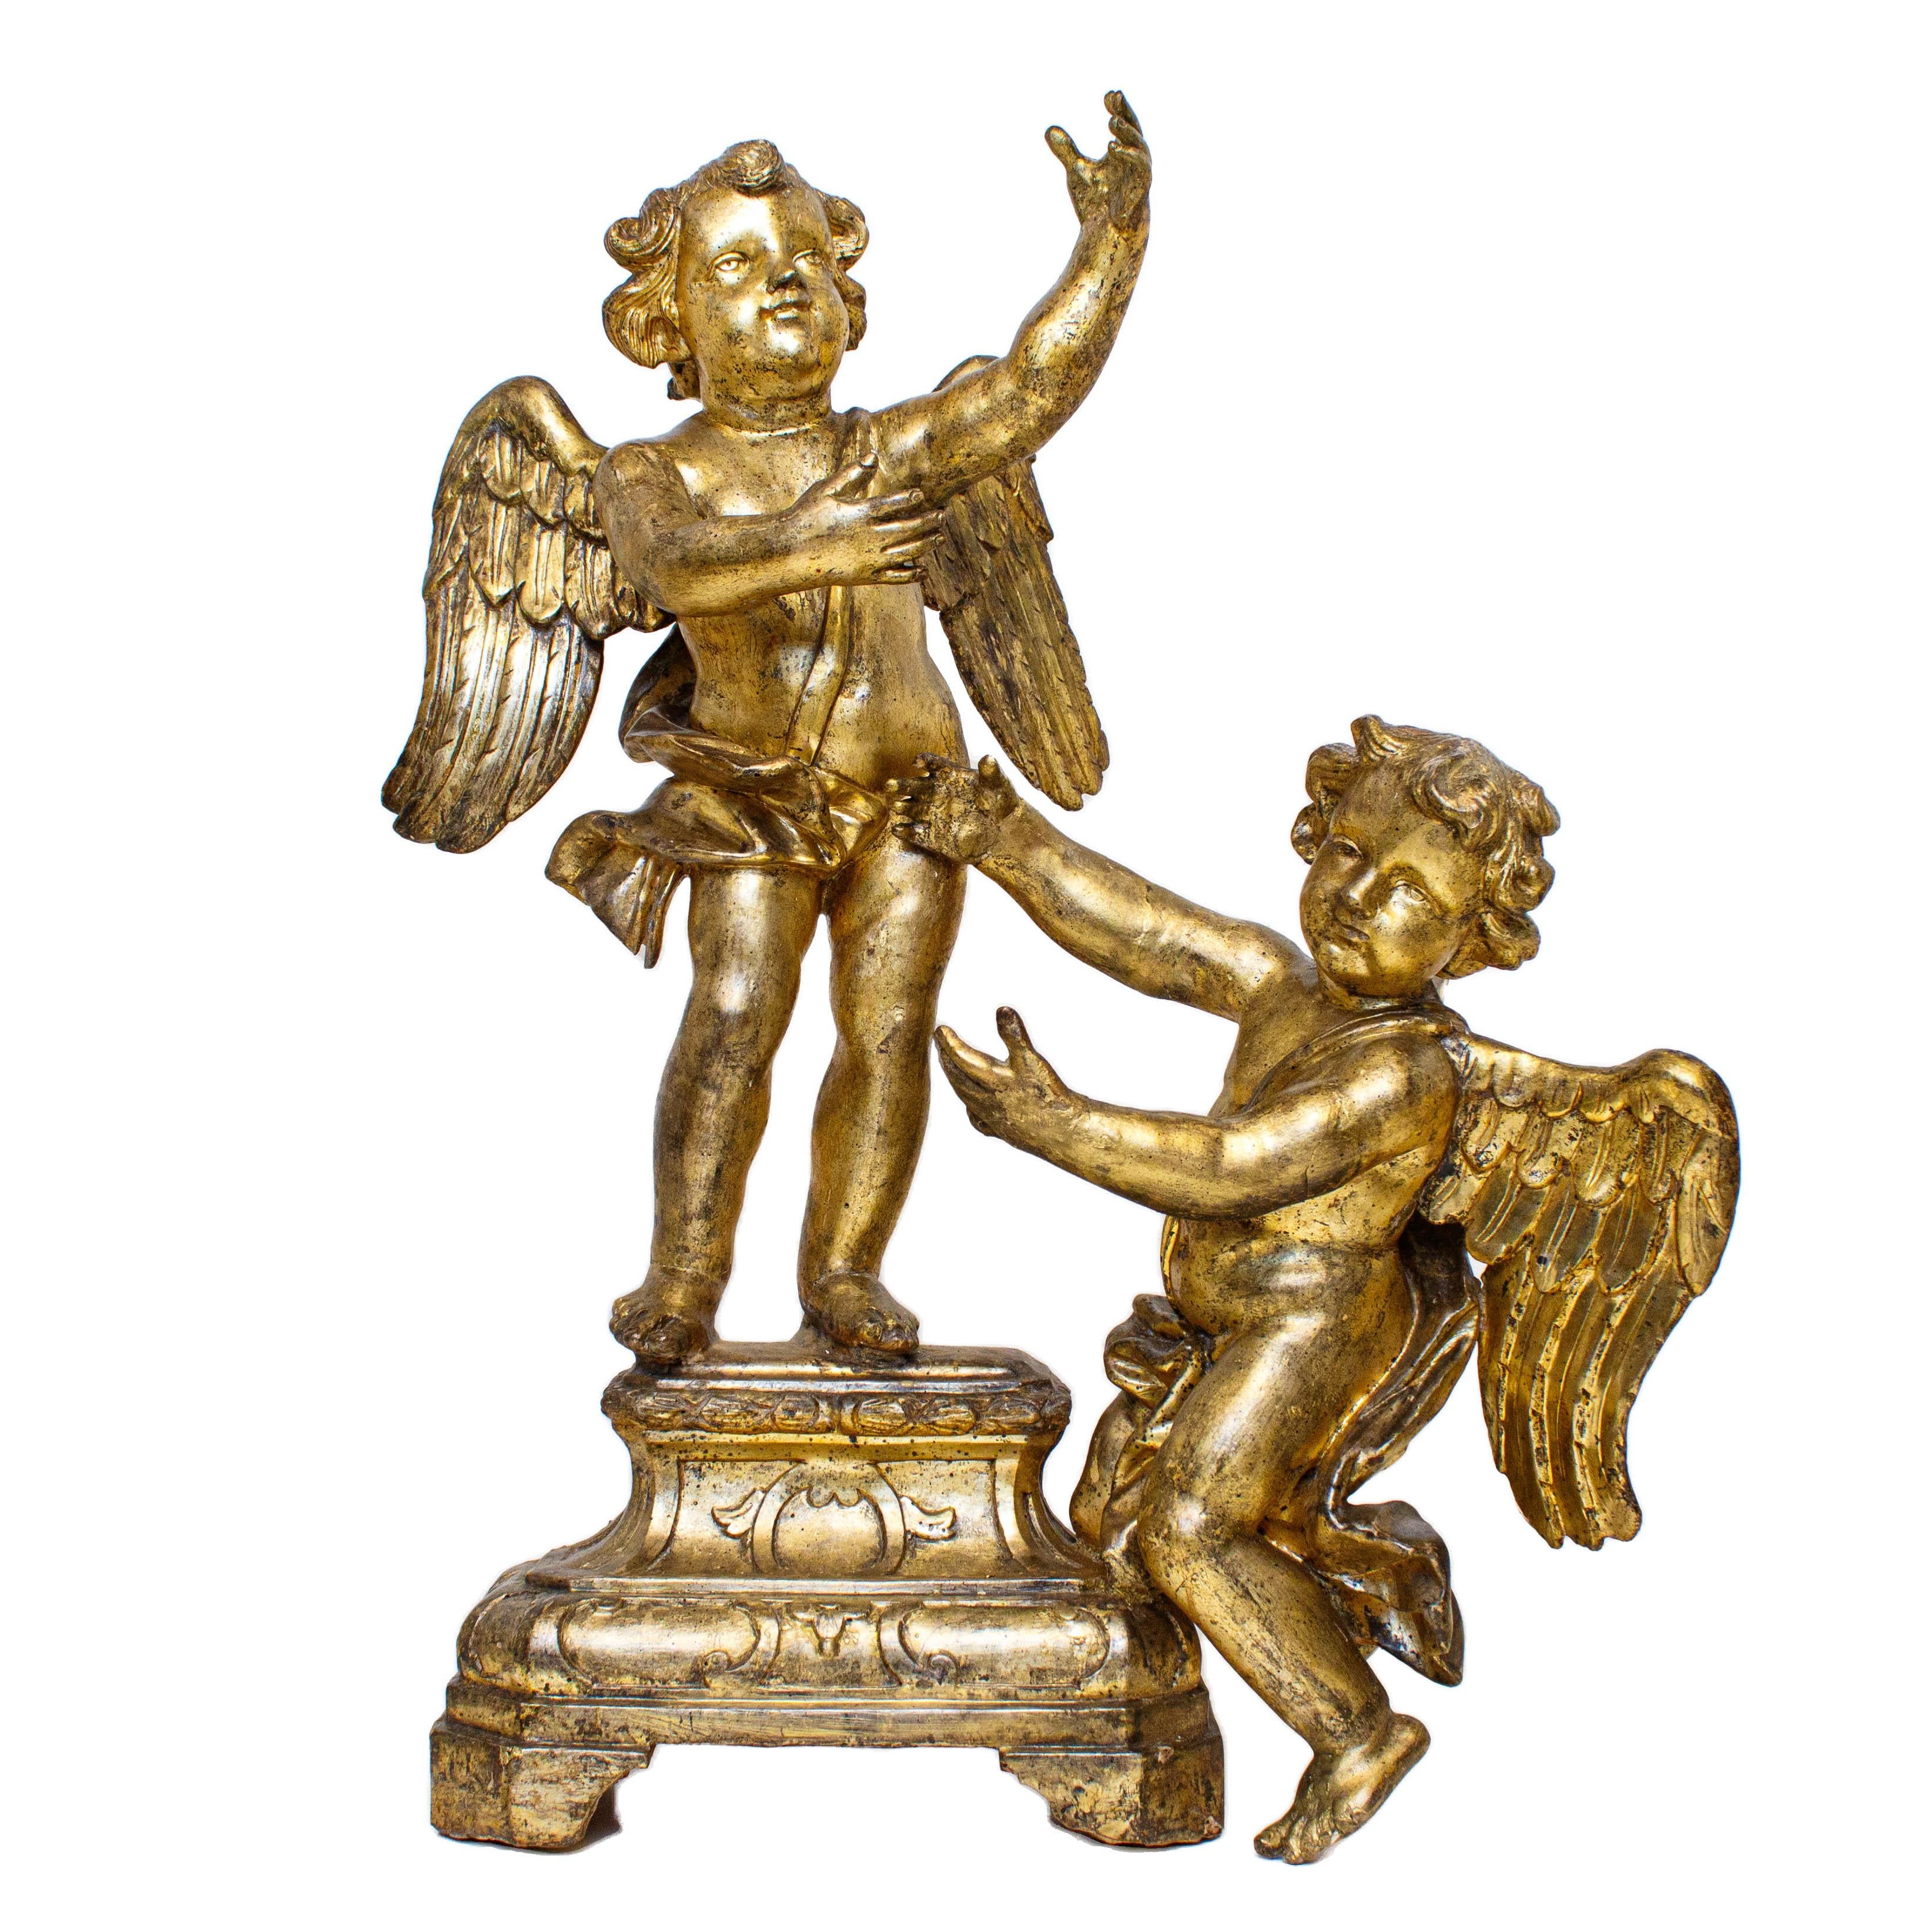 First half of the 18th century, Lombardy

Putti

(2) gilded wood, H 88 cm


The work is distinguished by the high artistic quality and the remarkable executive care, as evidenced by the thin drapery formed by a single band that surrounds the